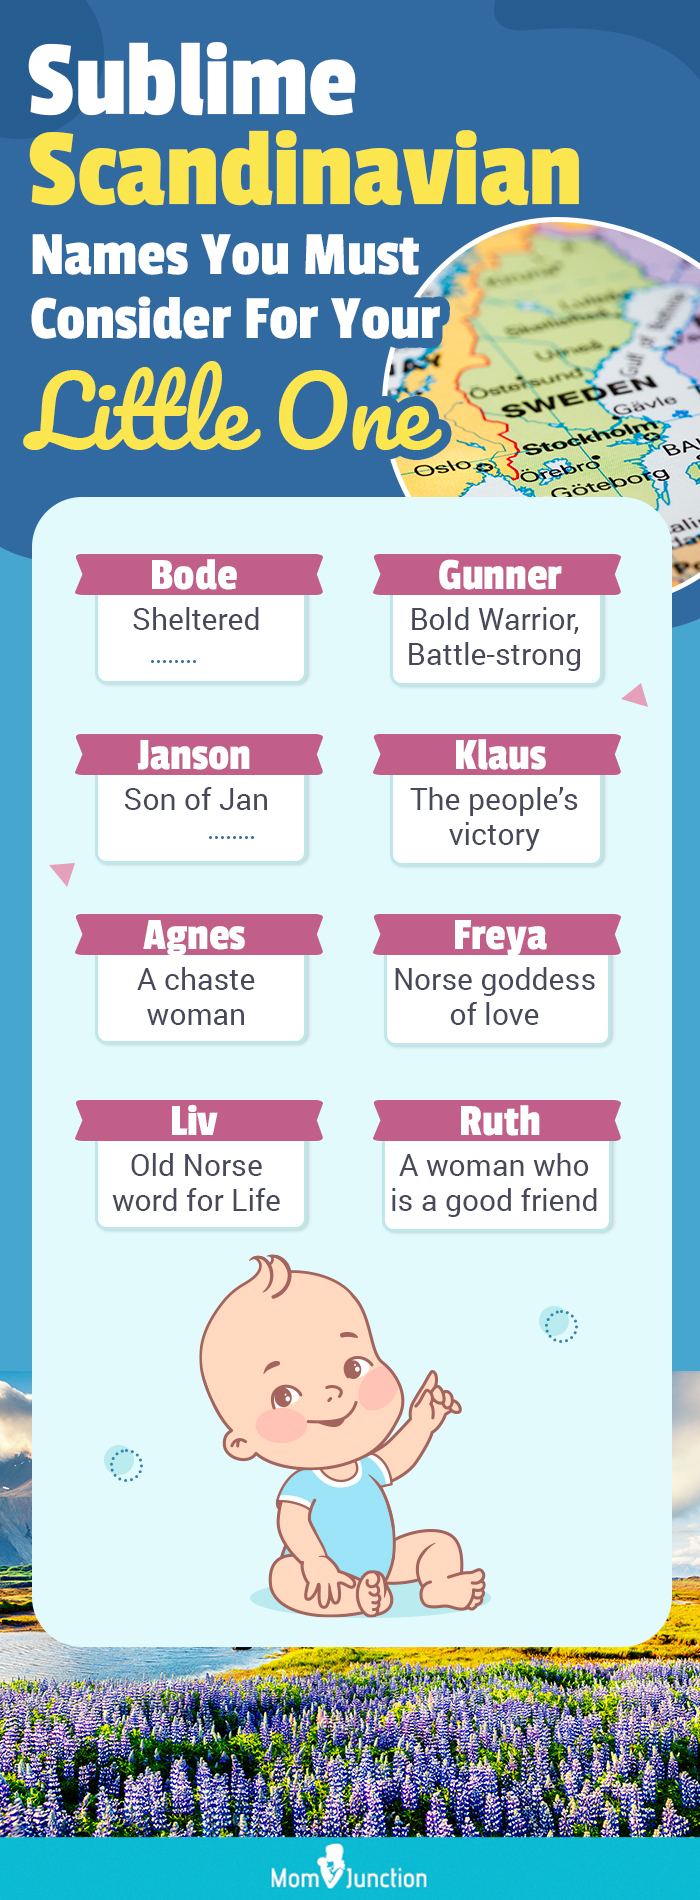 sublime scandinavian names you must consider for your little one (infographic)